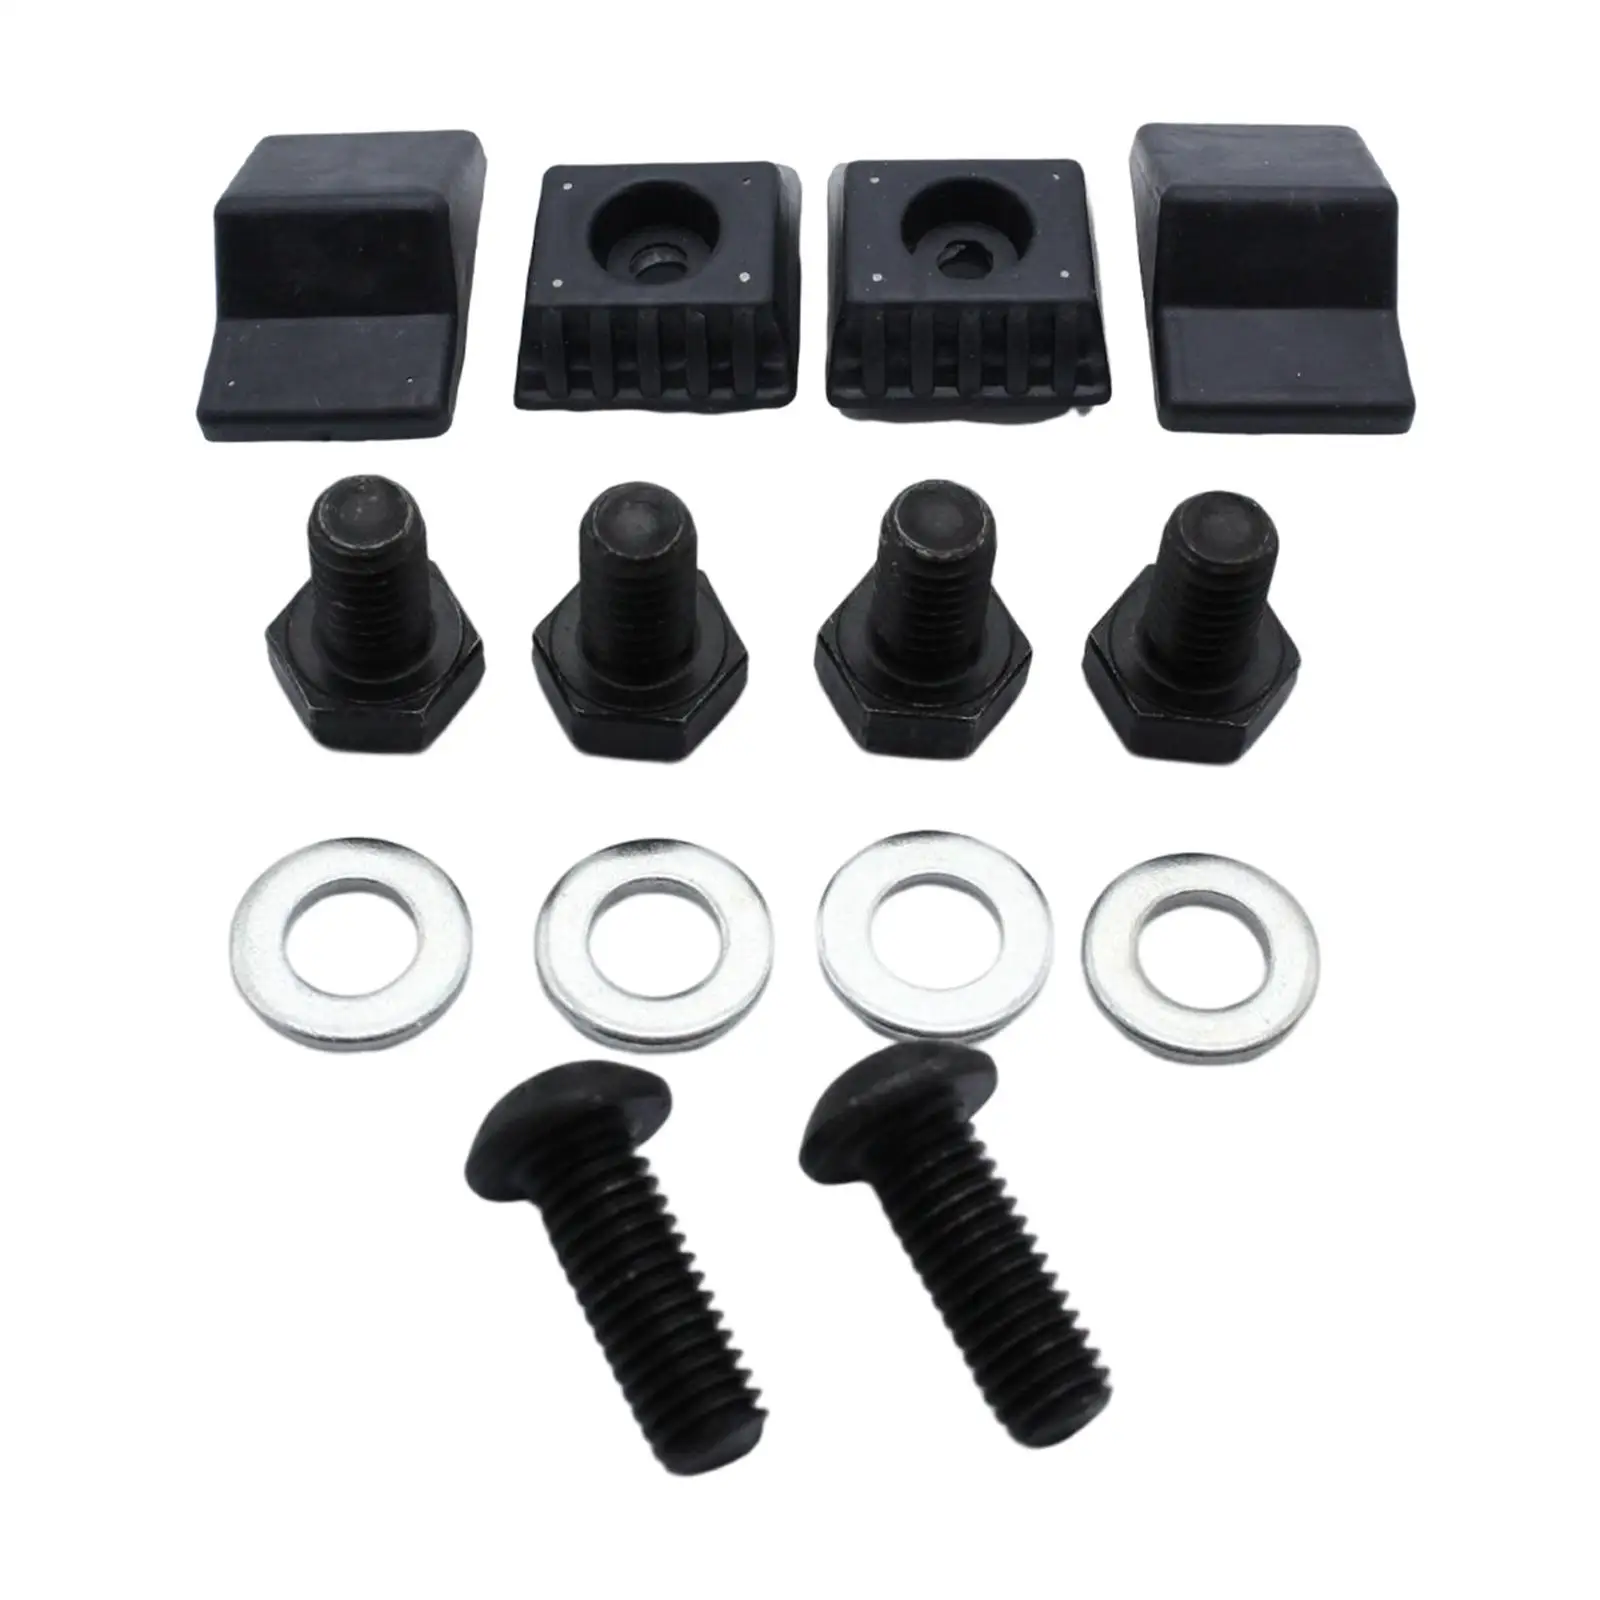 Car Trunk Stop Buffer with Screw Kit Replaces 1247580144 A1247580144 1247580044 A1247580044 Fit for Mercedes E Class W124 S124